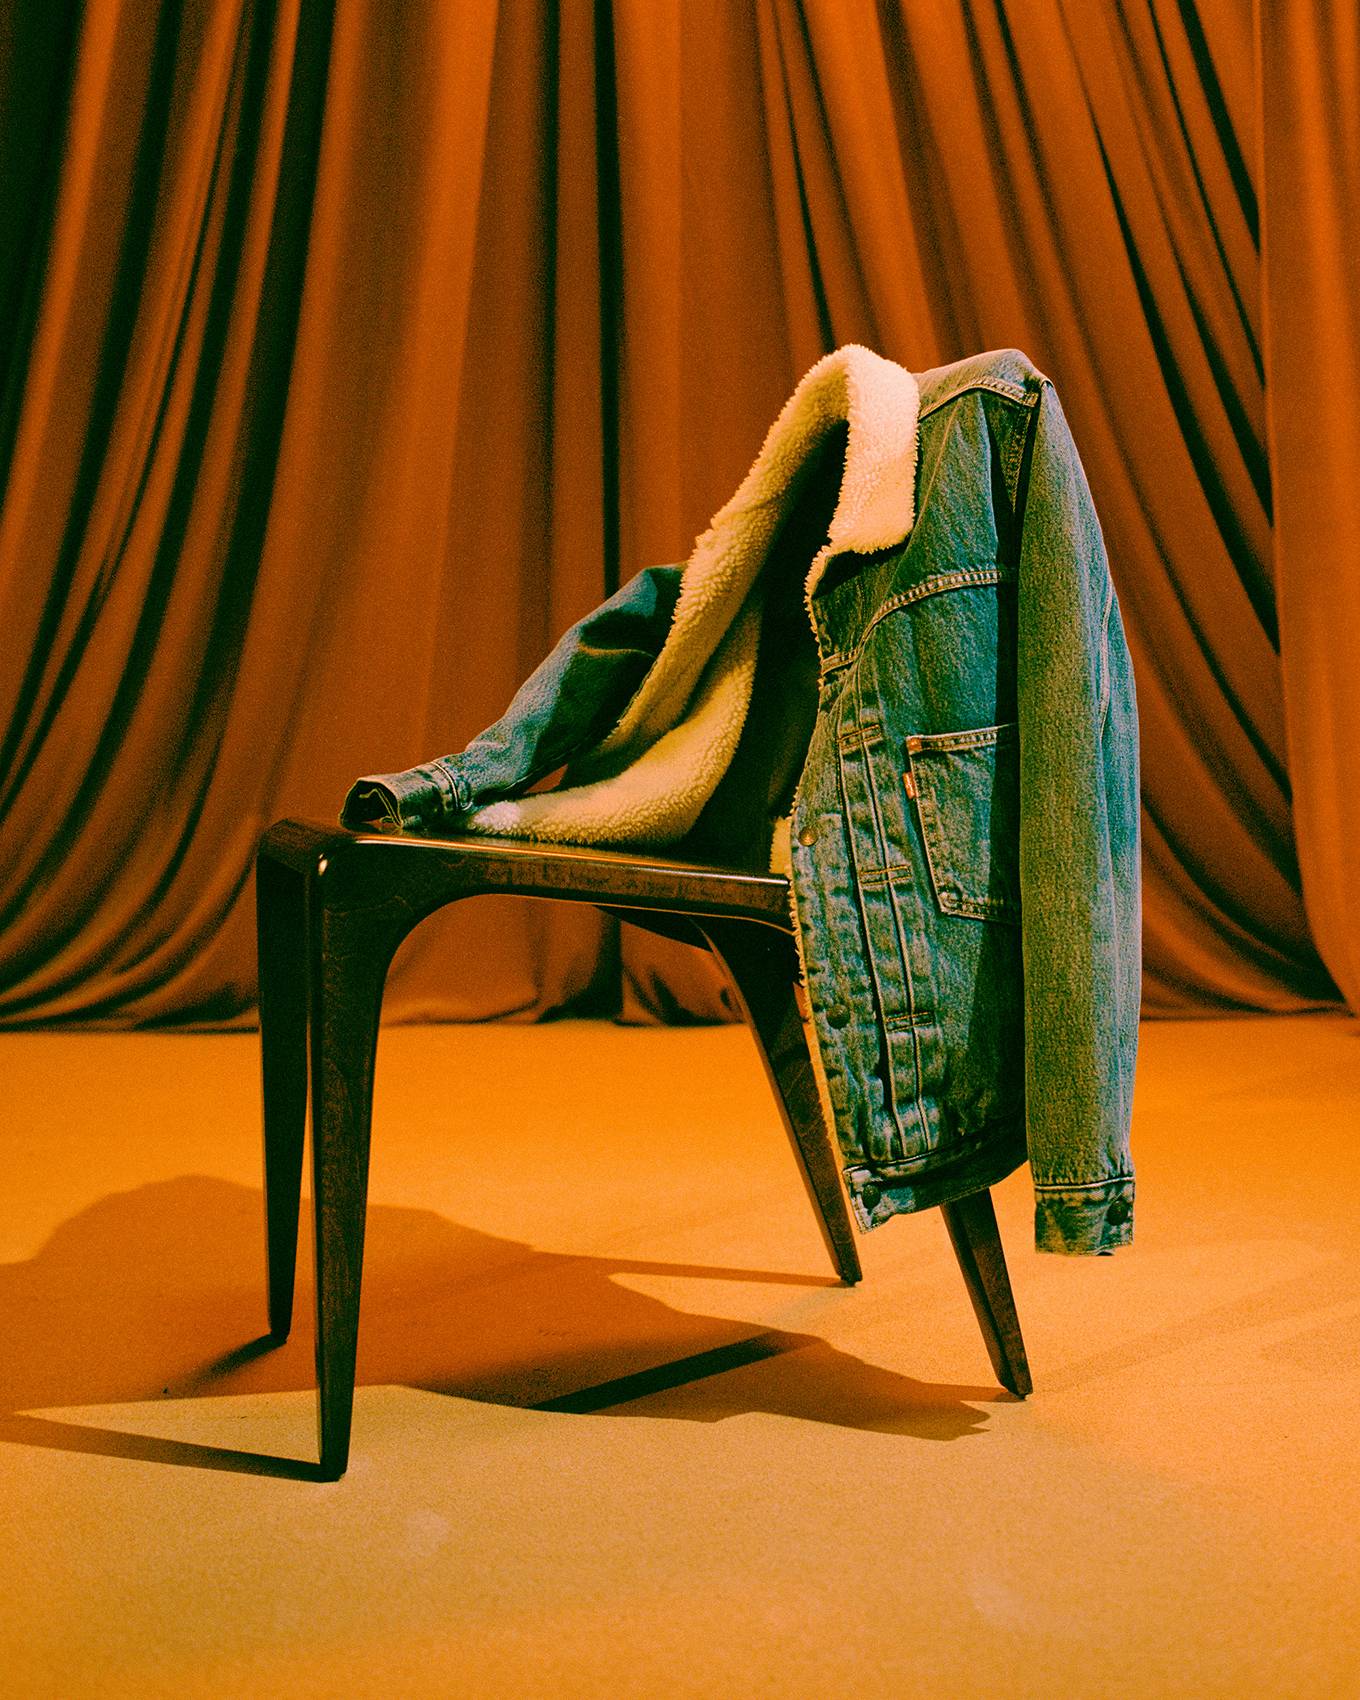 Sherpa Trucker Jacket draped over a chair.